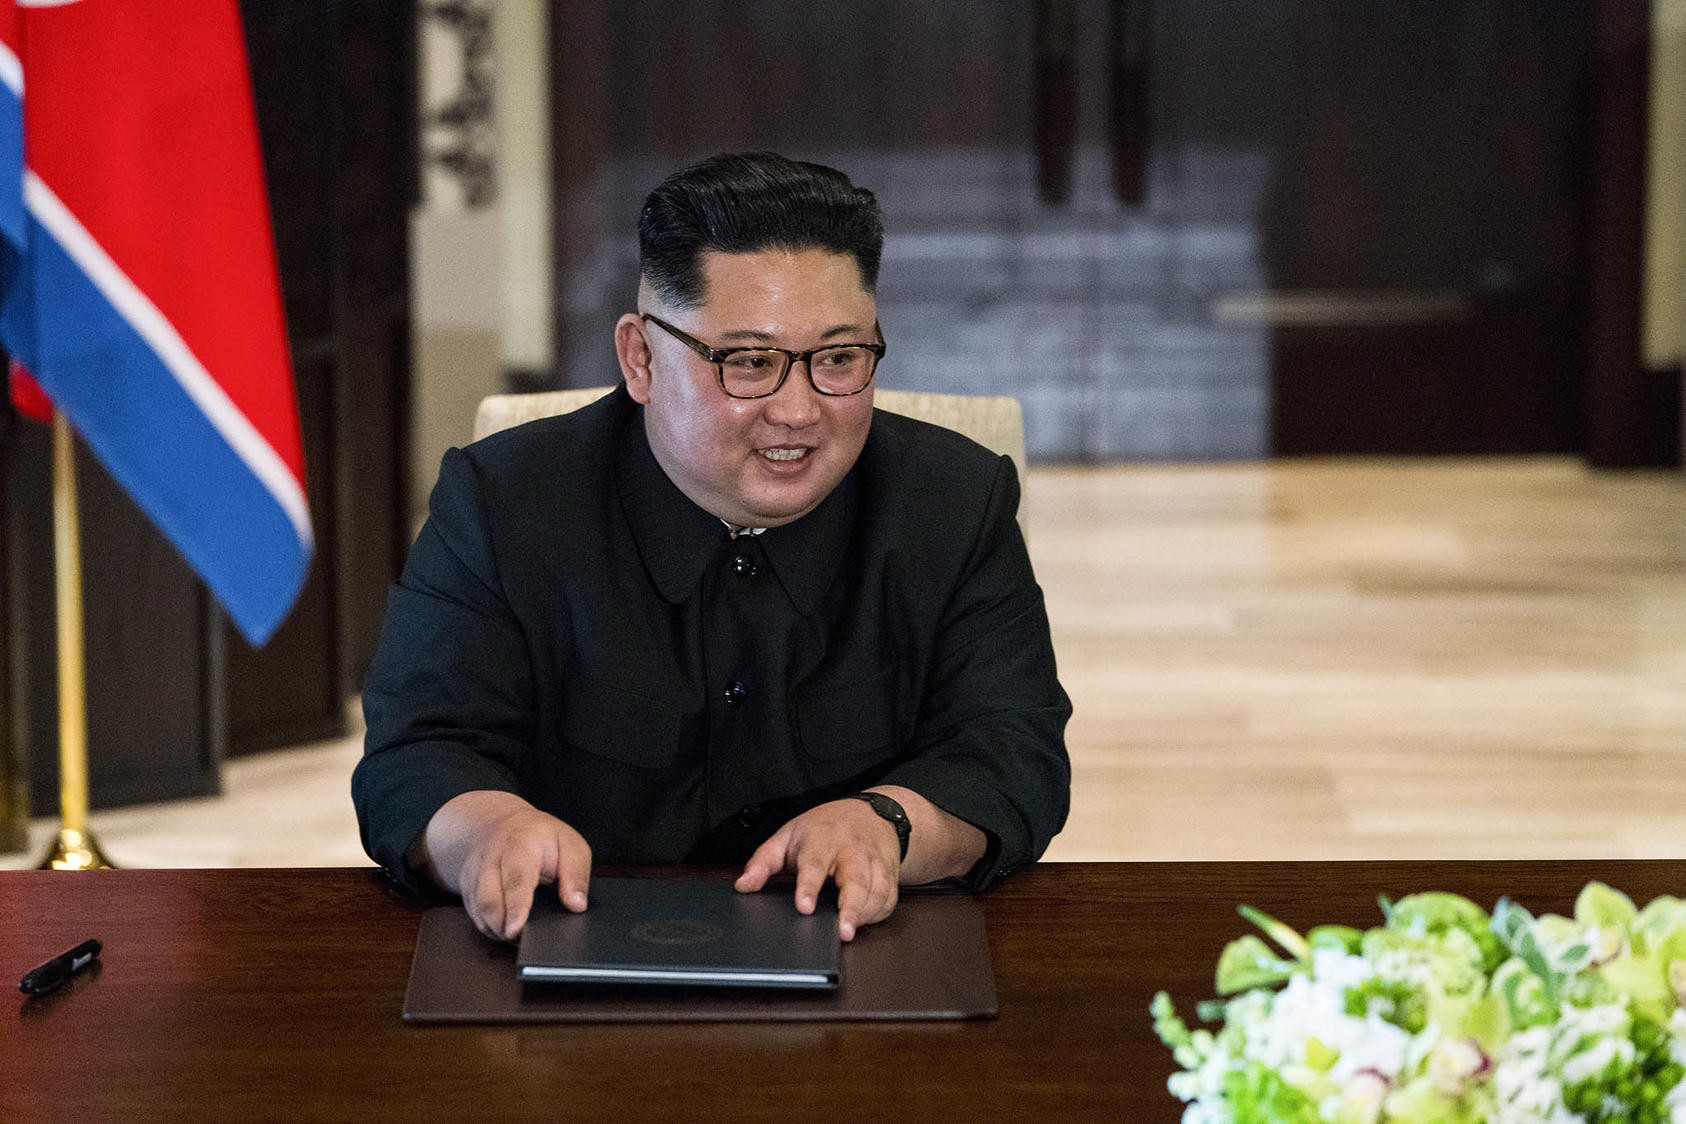 North Korean leader Kim Jong Un during a signing ceremony with then U.S. president Donald Trump on Sentosa Island in Singapore, June 12, 2018. (Doug Mills/The New York Times)